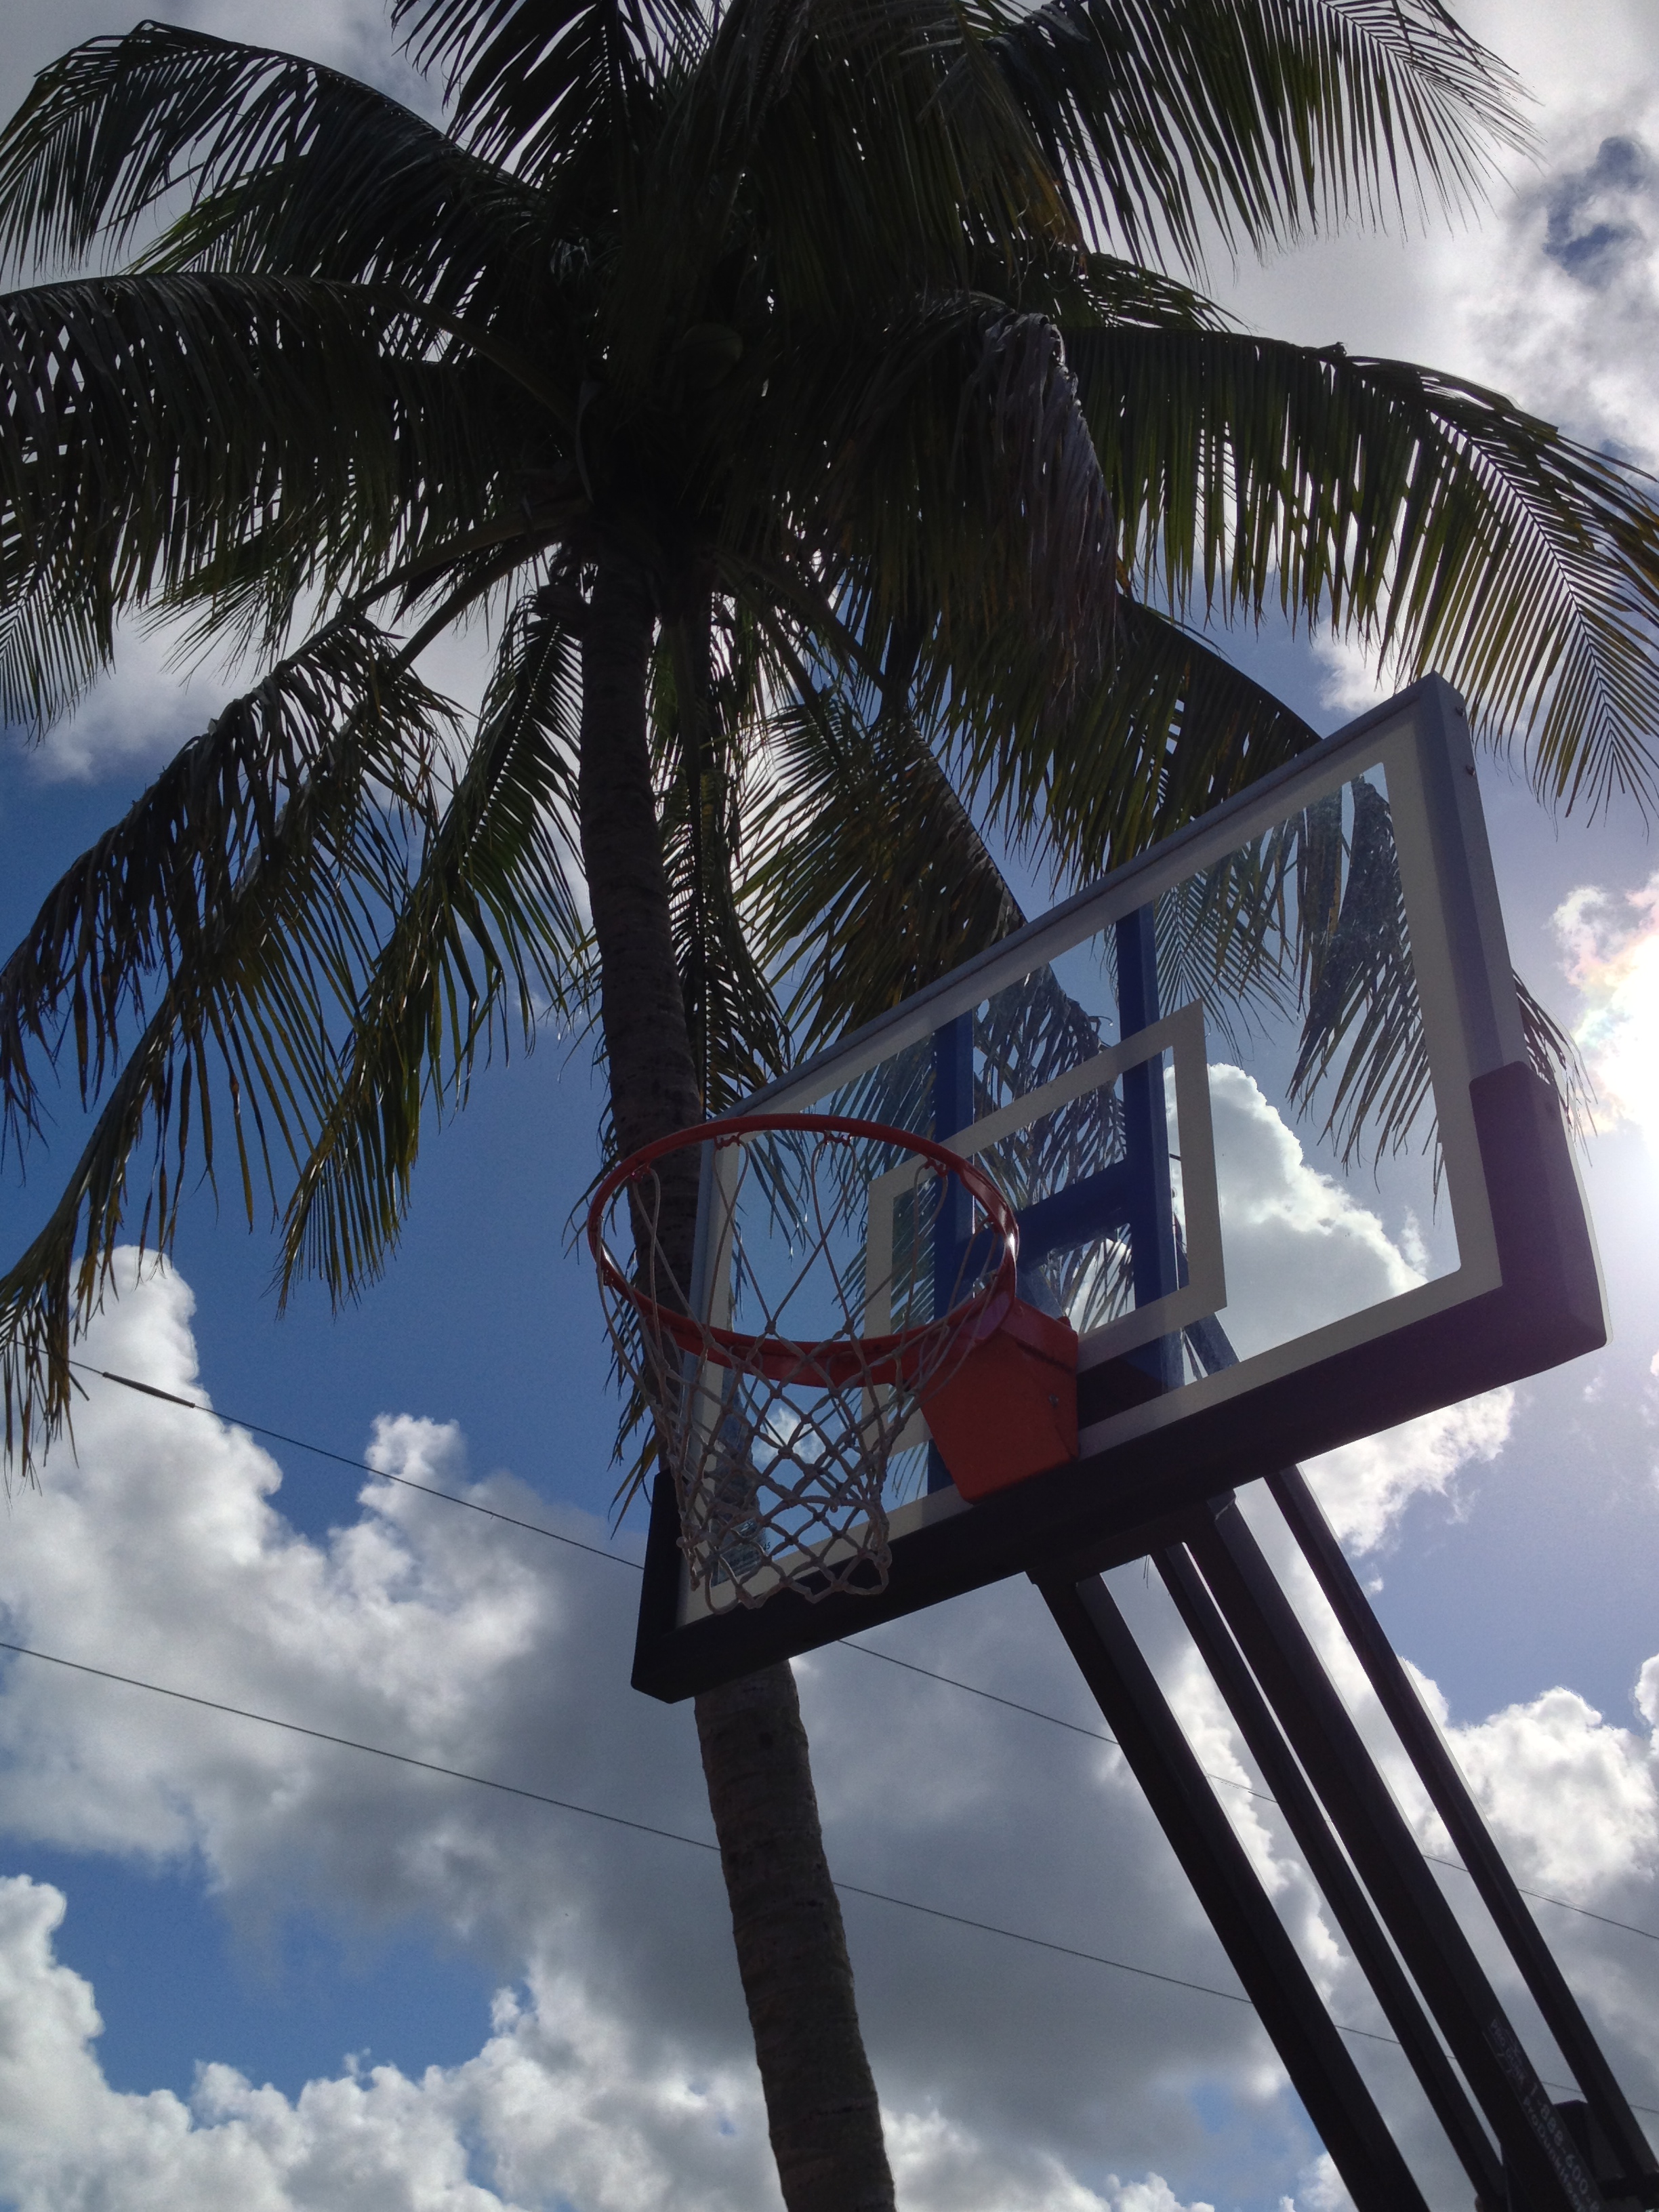 This upward shot shows Florida's well known palm trees above this Pro Dunk Silver Basketball system.